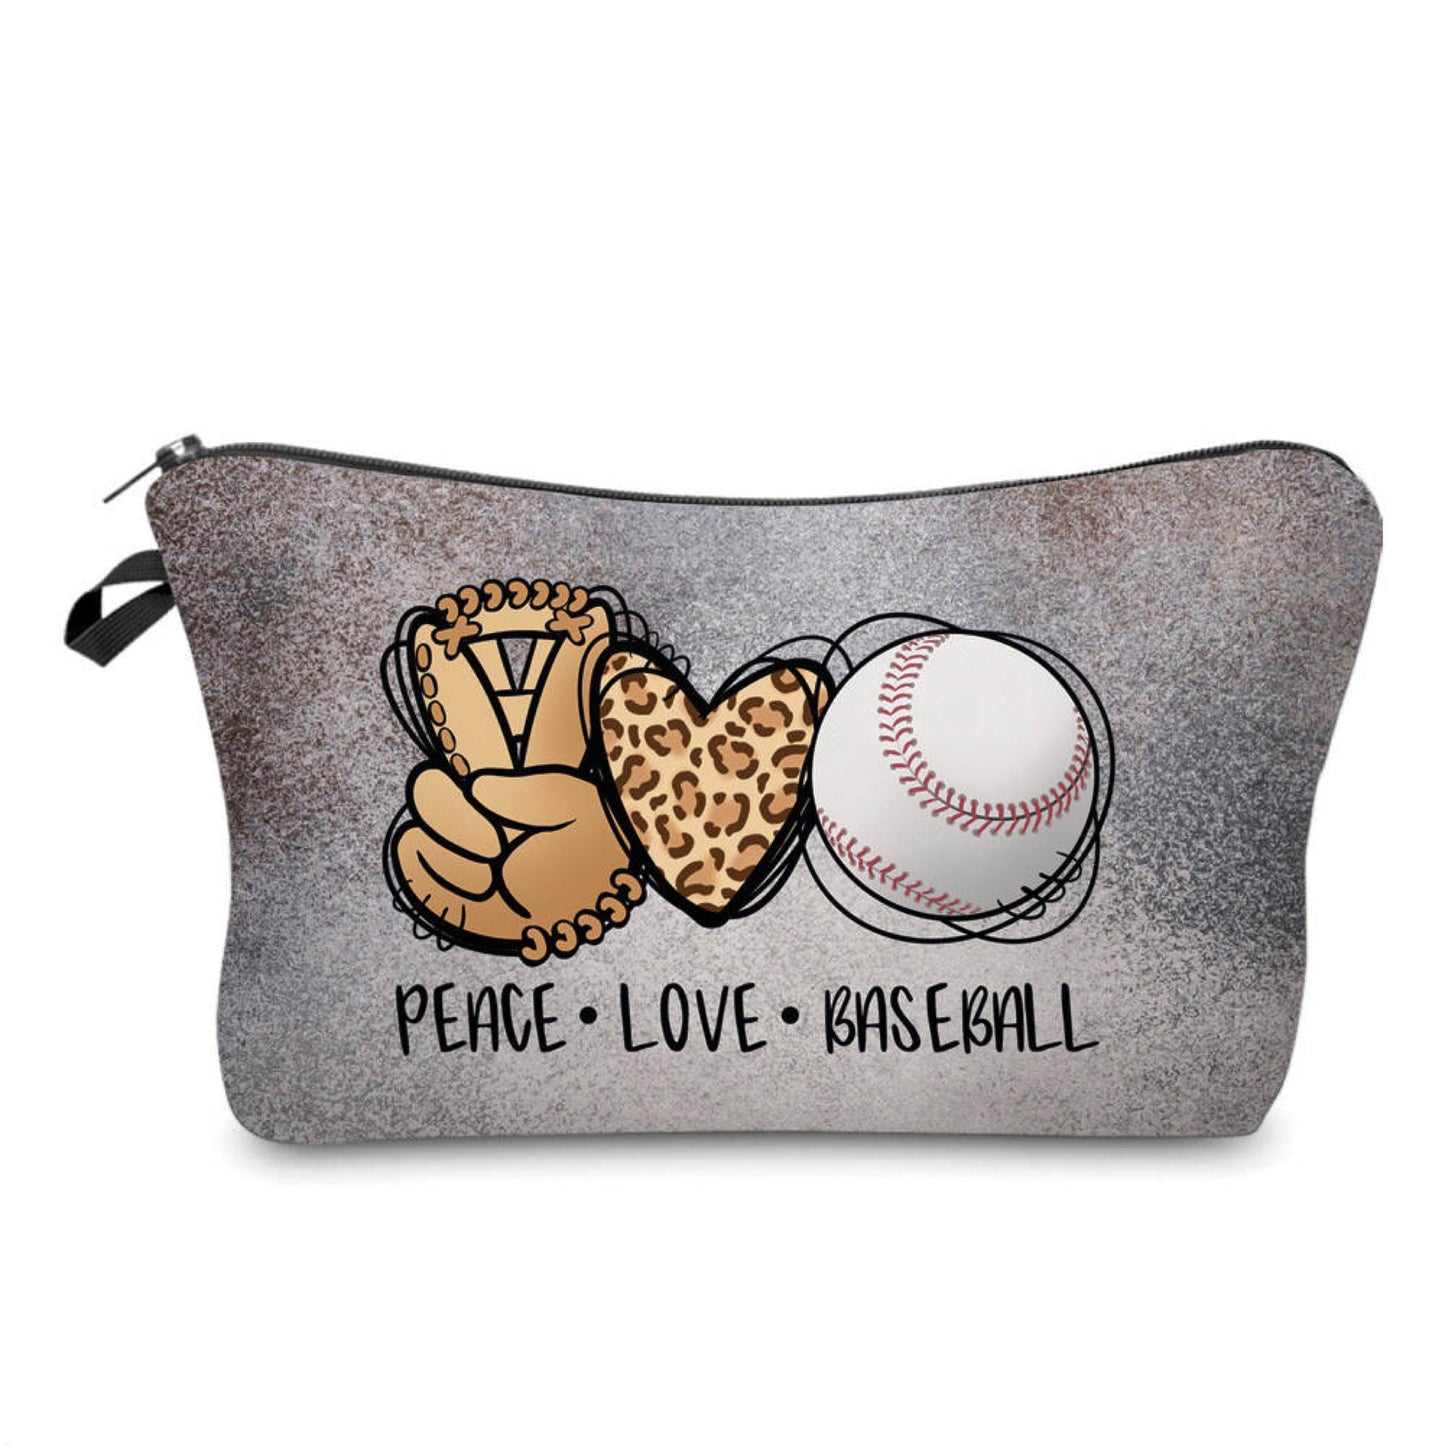 Peace Love Baseball - Water-Resistant Multi-Use Pouch